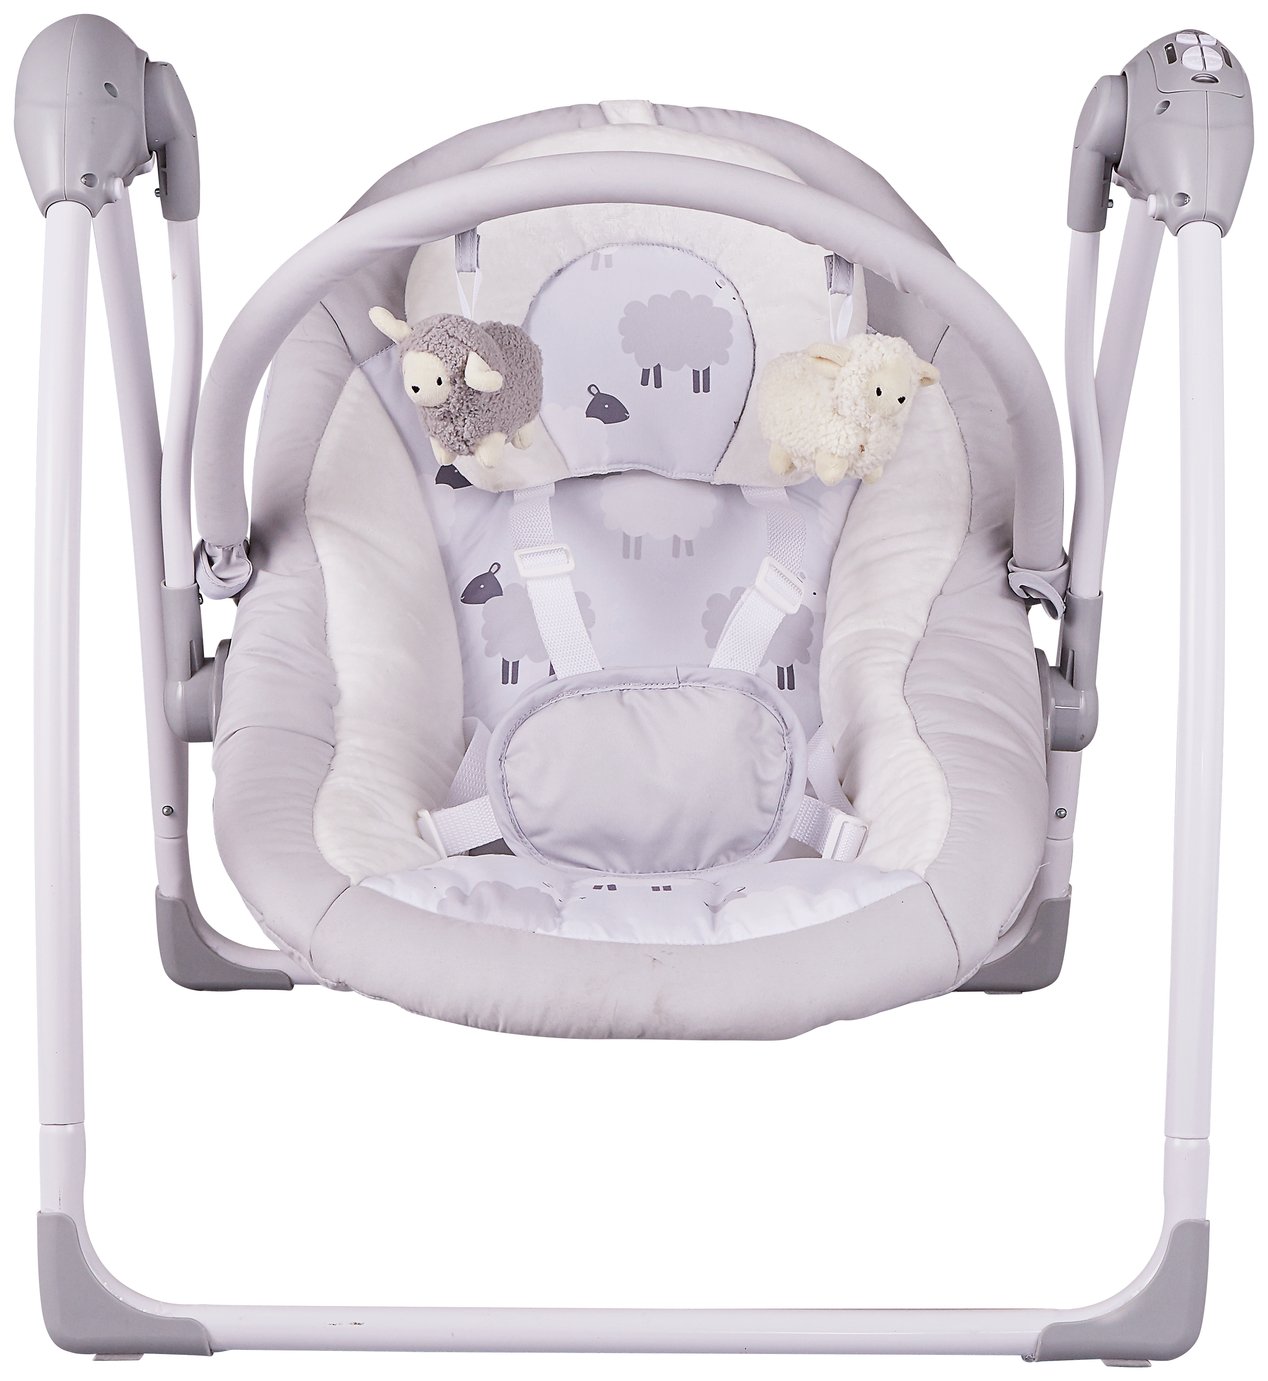 Cuggl Music & Sounds Baby Swing Review